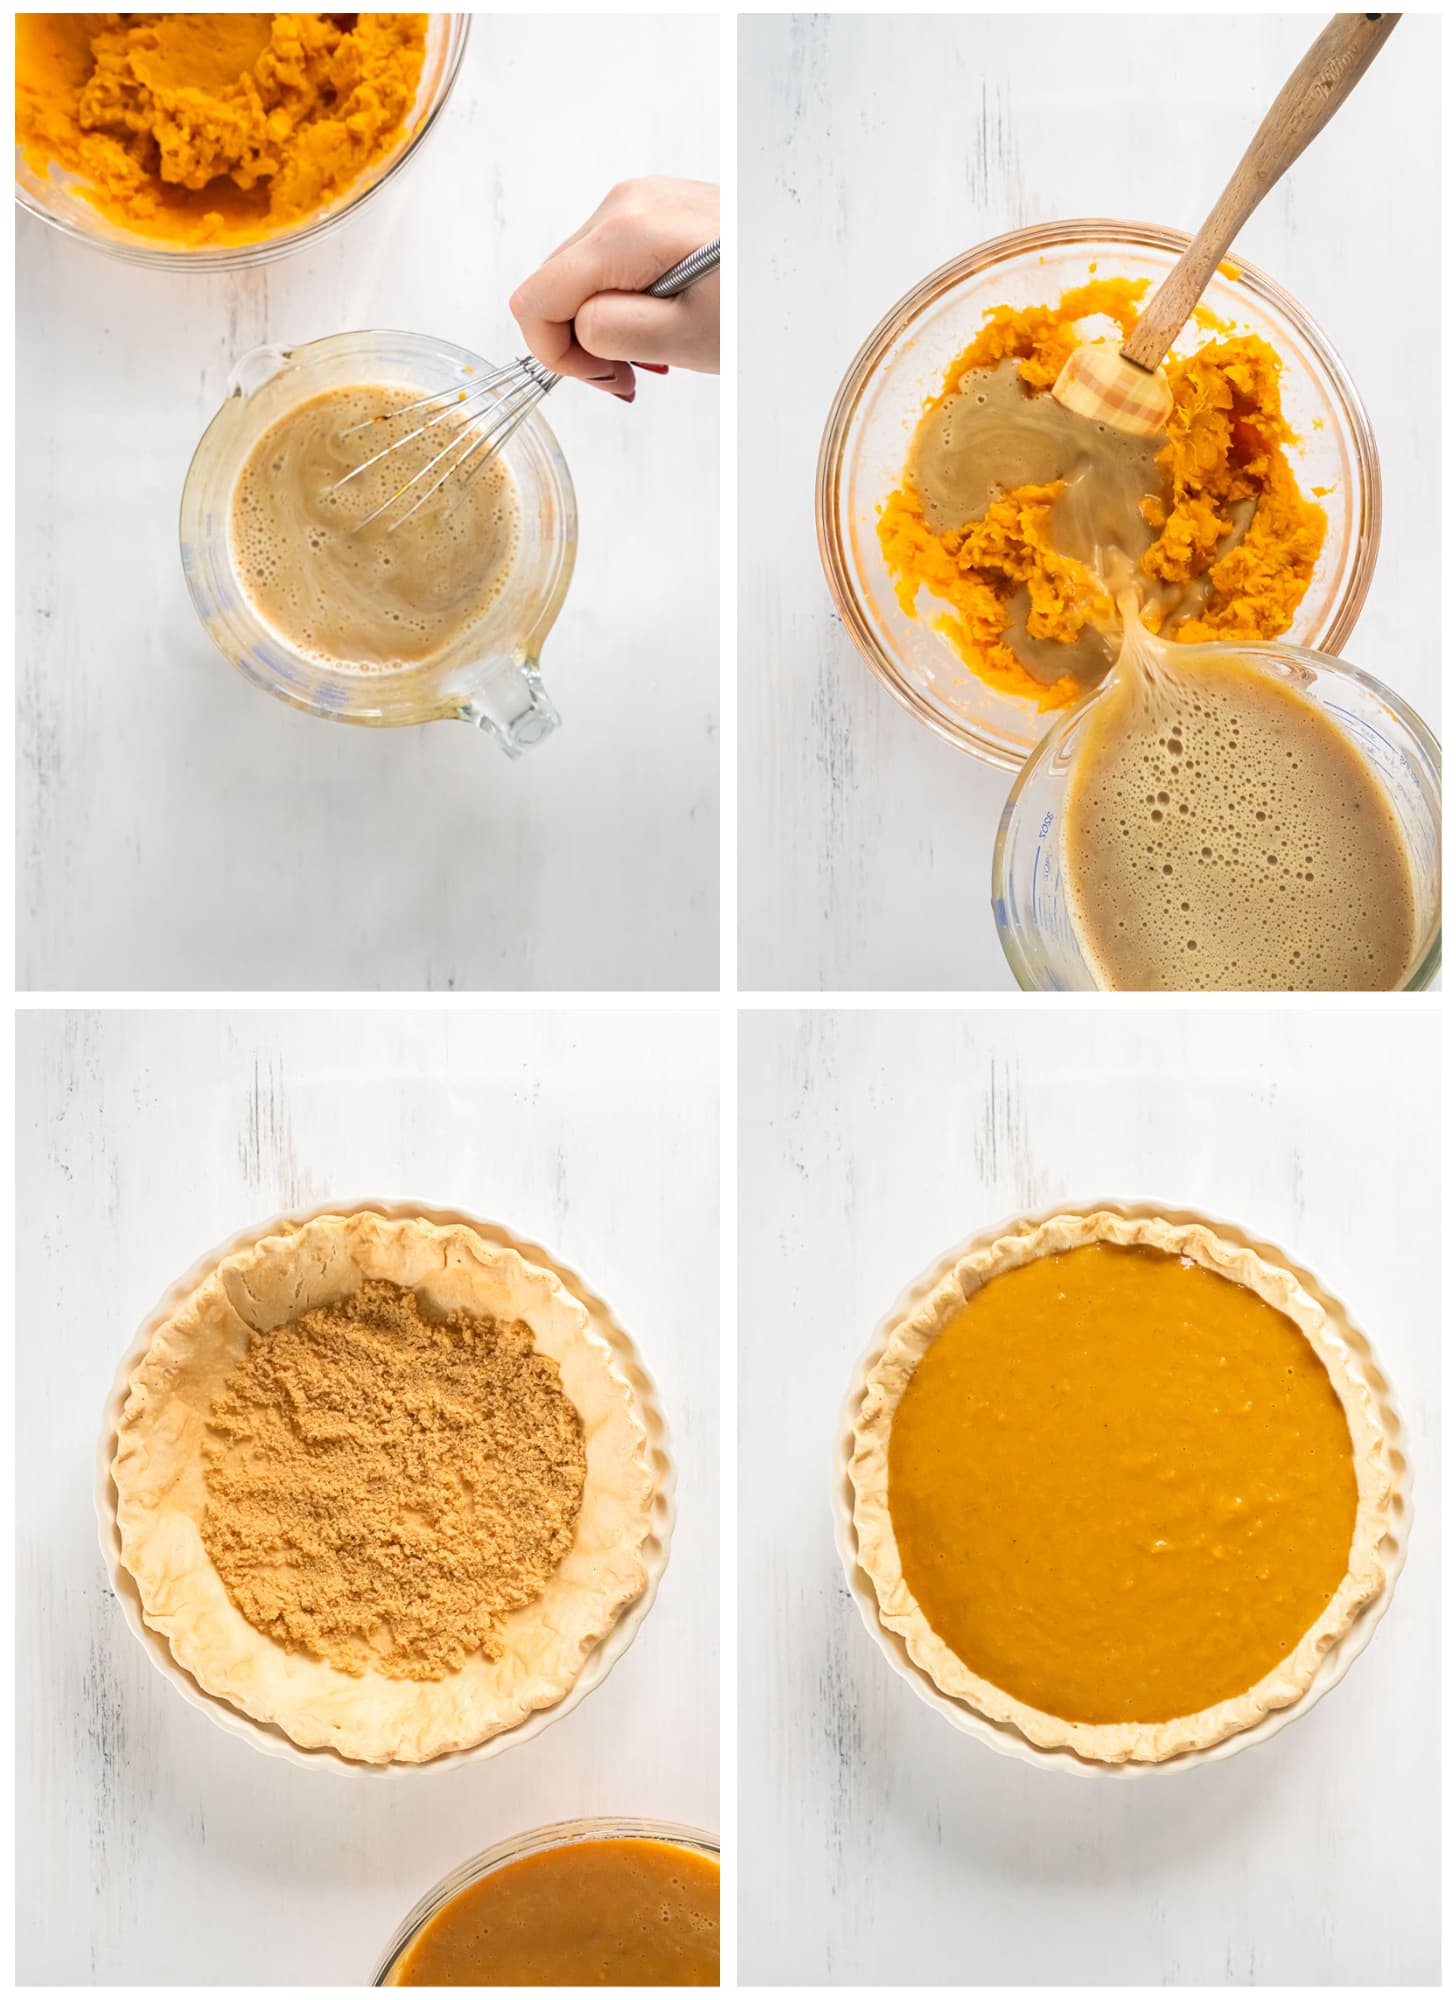 photo collage demonstrating how to make sweet potato pie filling in a mixing bowl and adding it to a partially baked pie shell